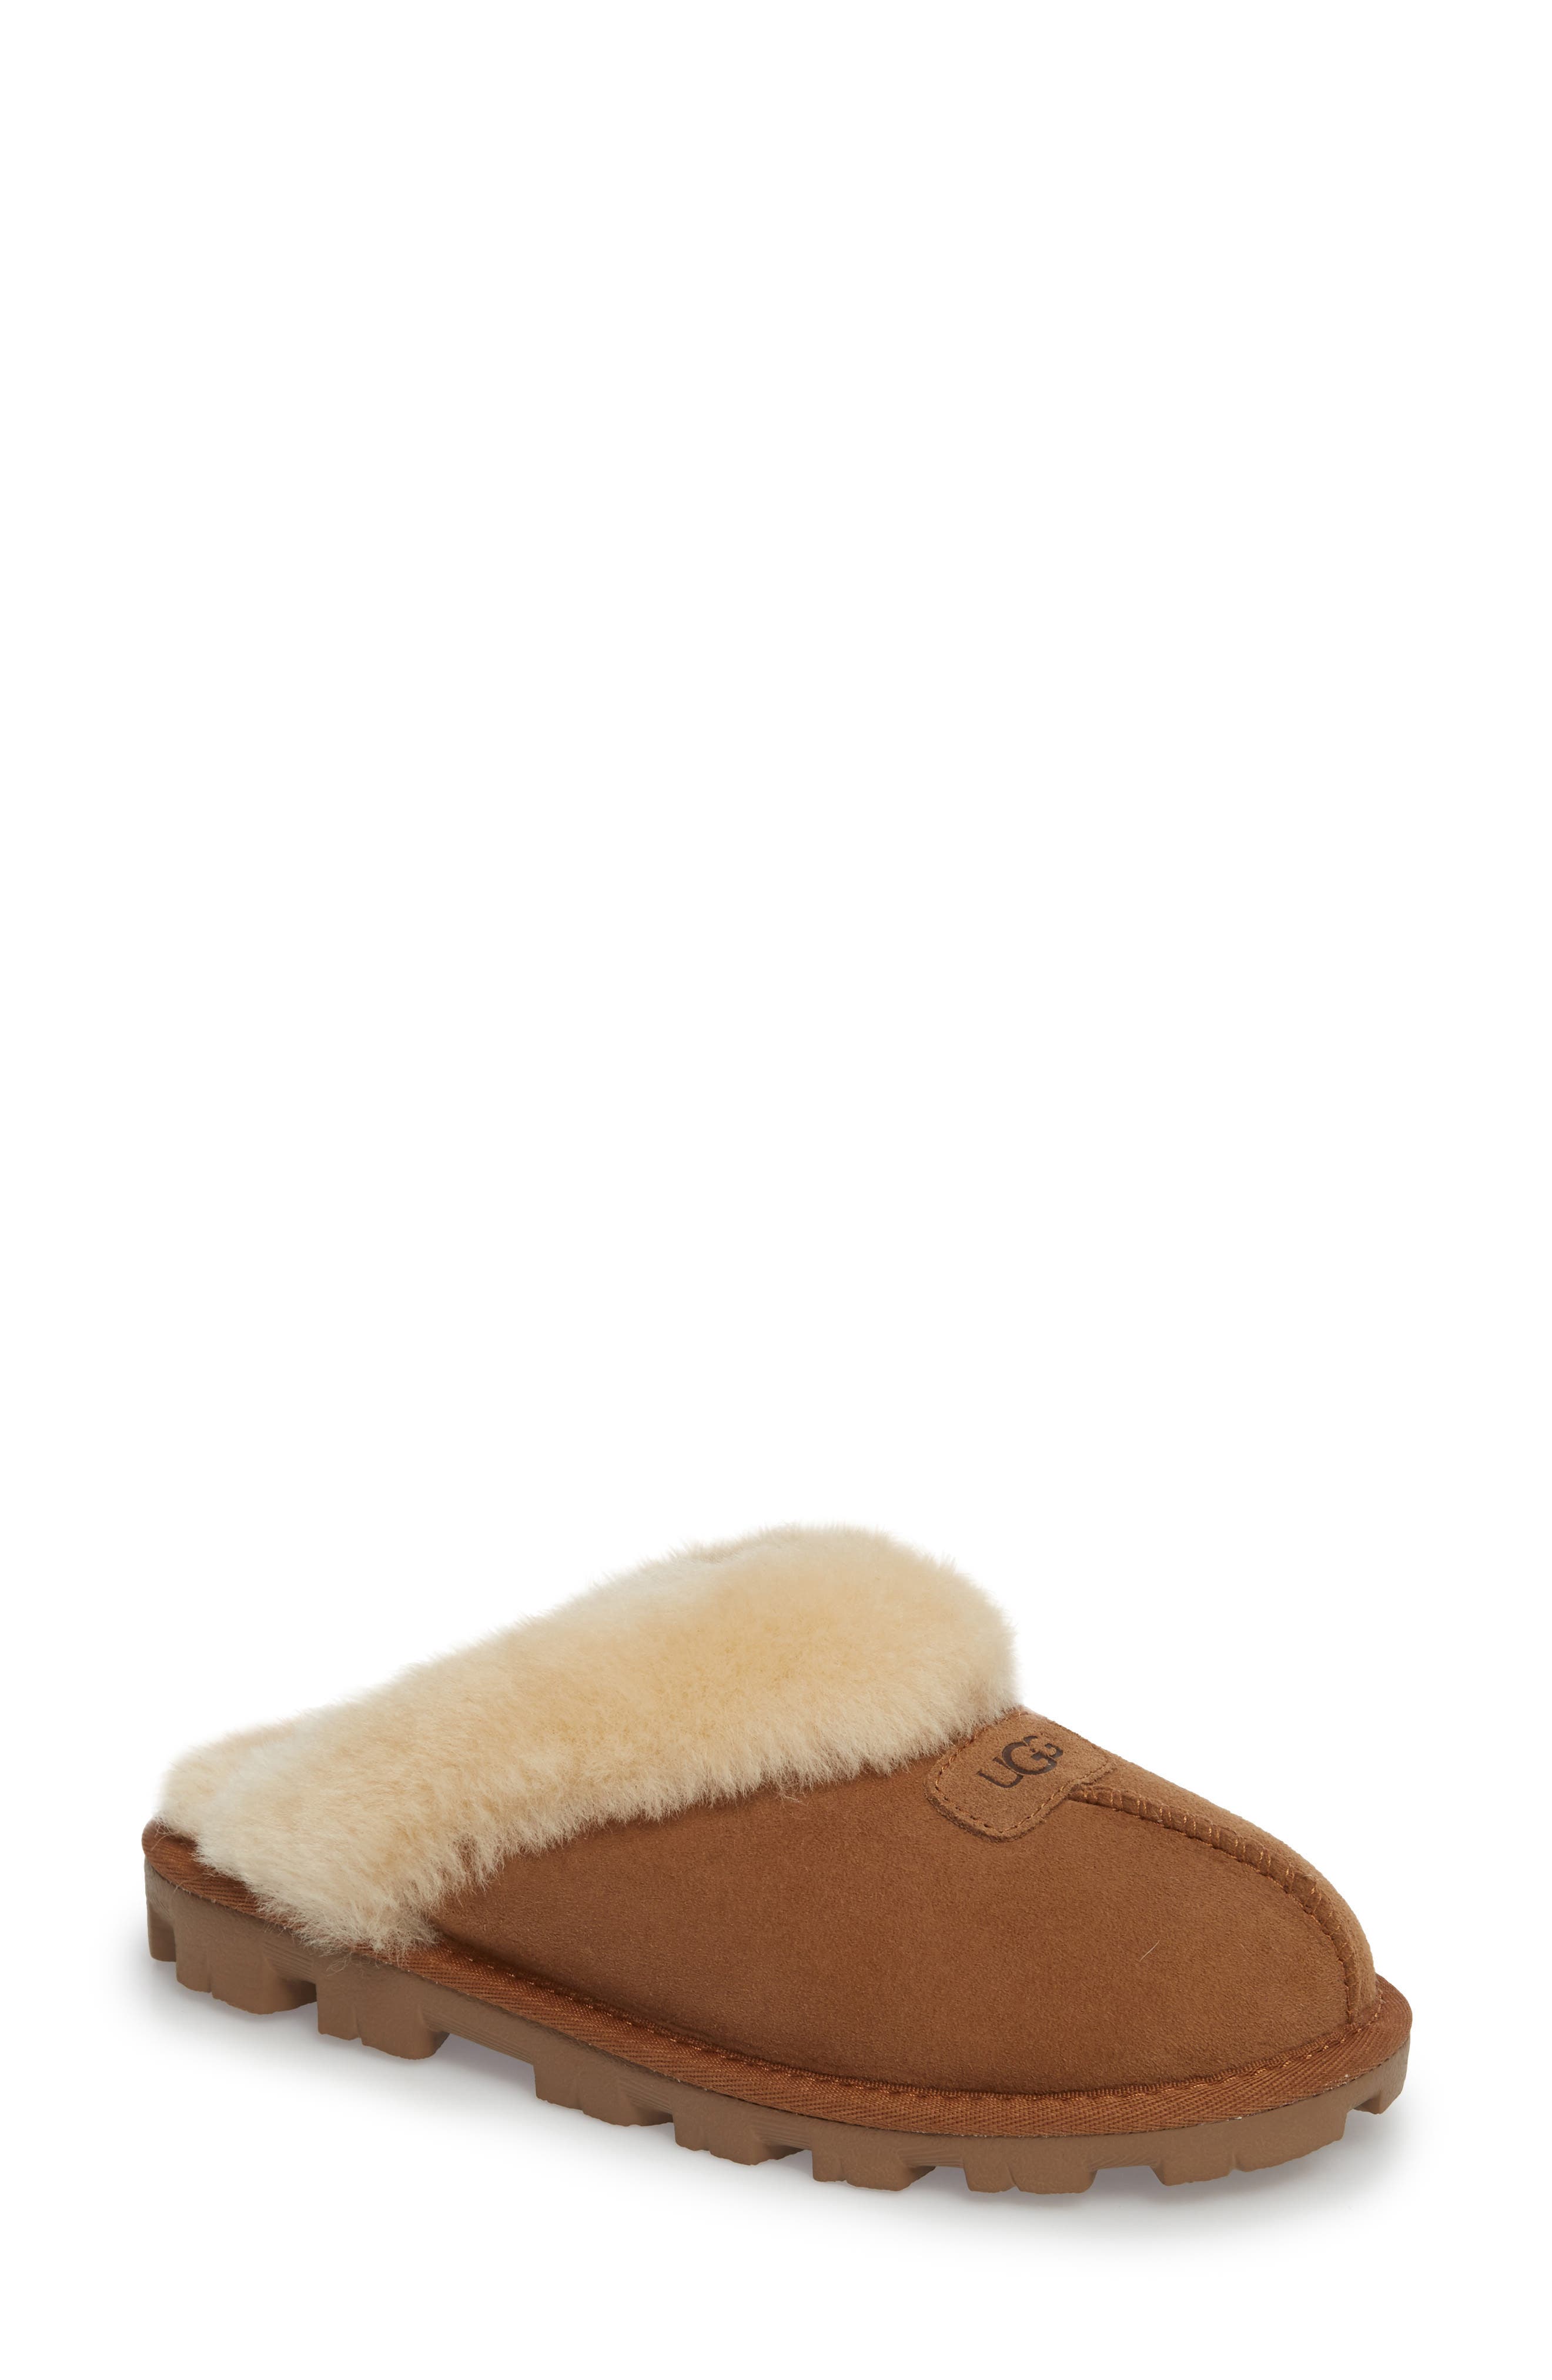 discontinued ugg slippers